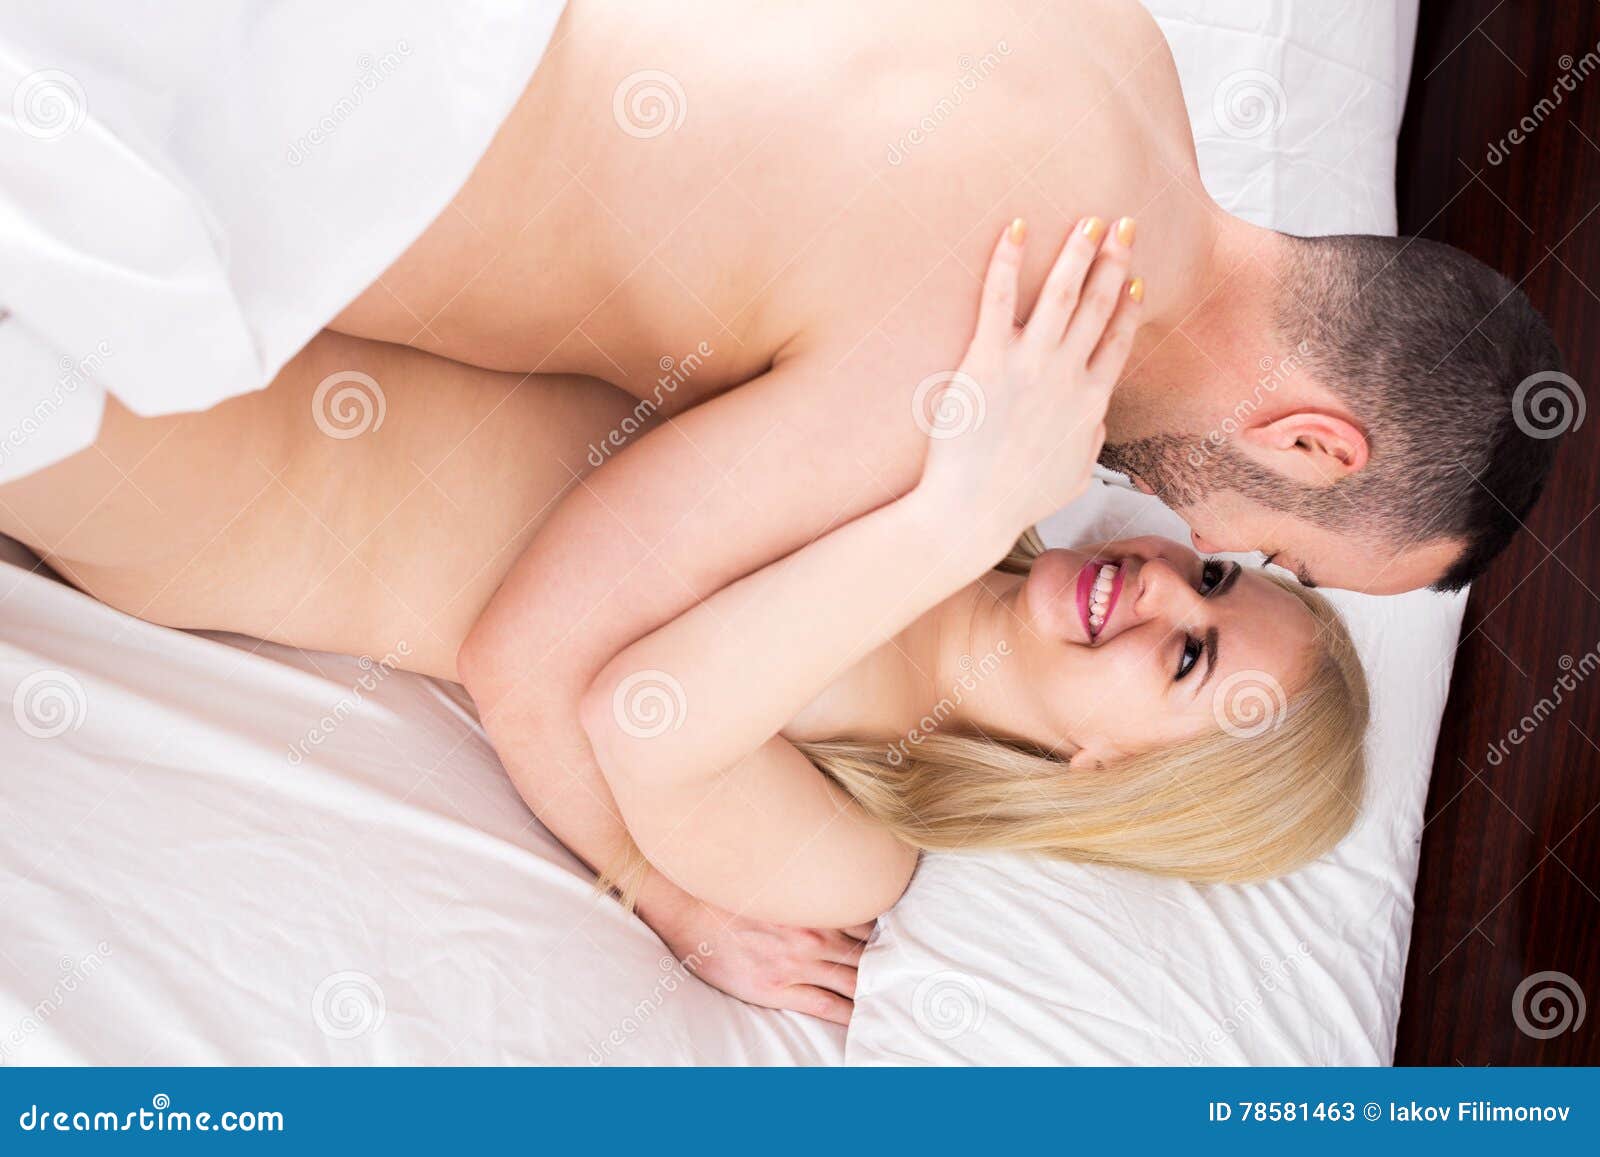 Girl and Handsome Boyfriend Having Sex Stock Image picture